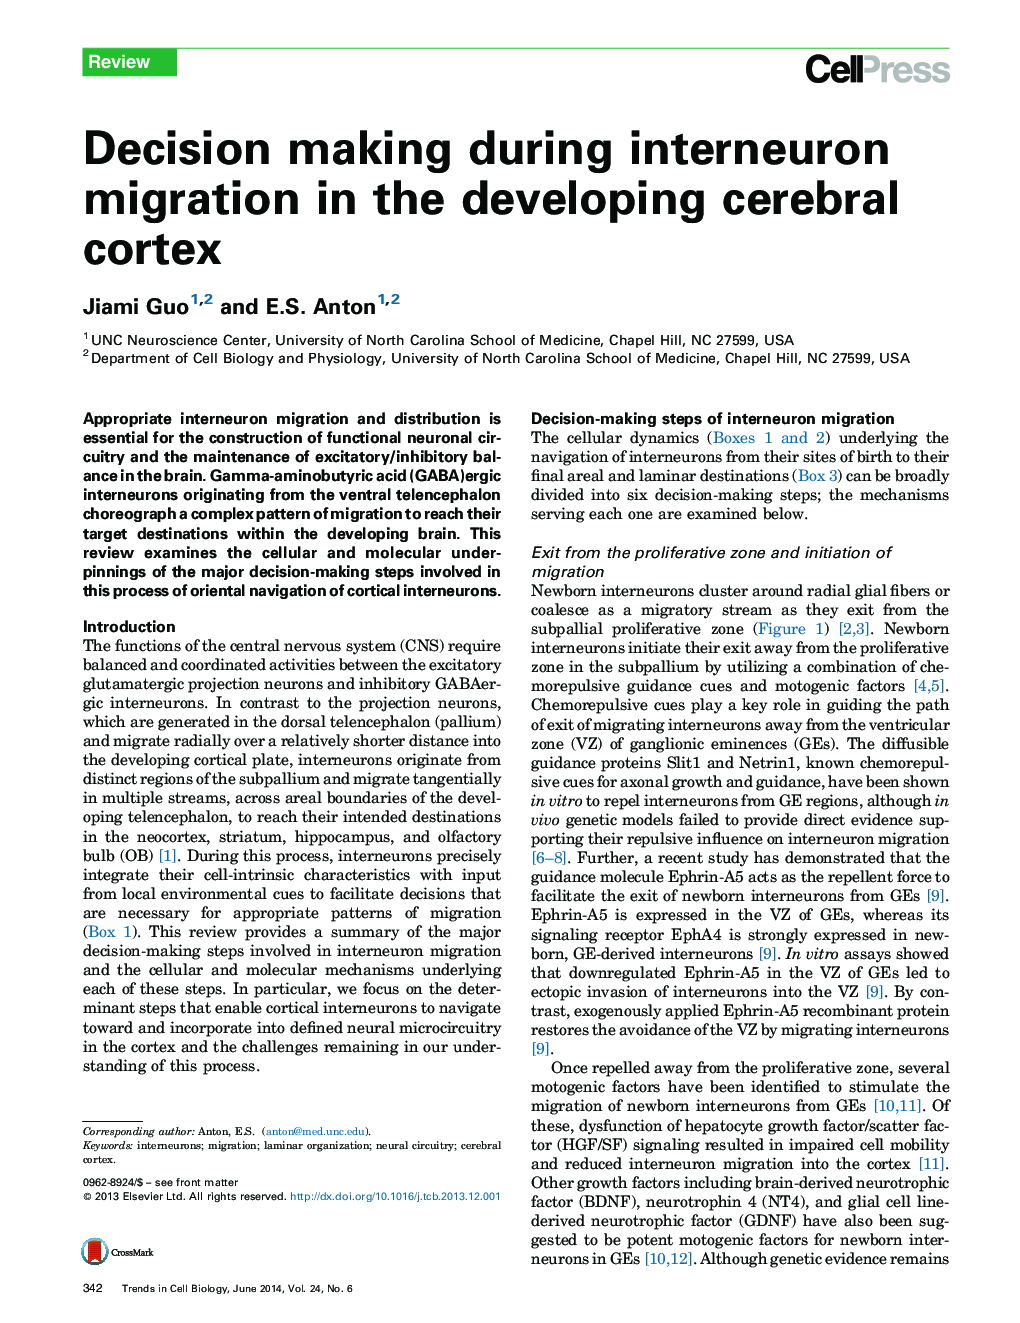 Decision making during interneuron migration in the developing cerebral cortex